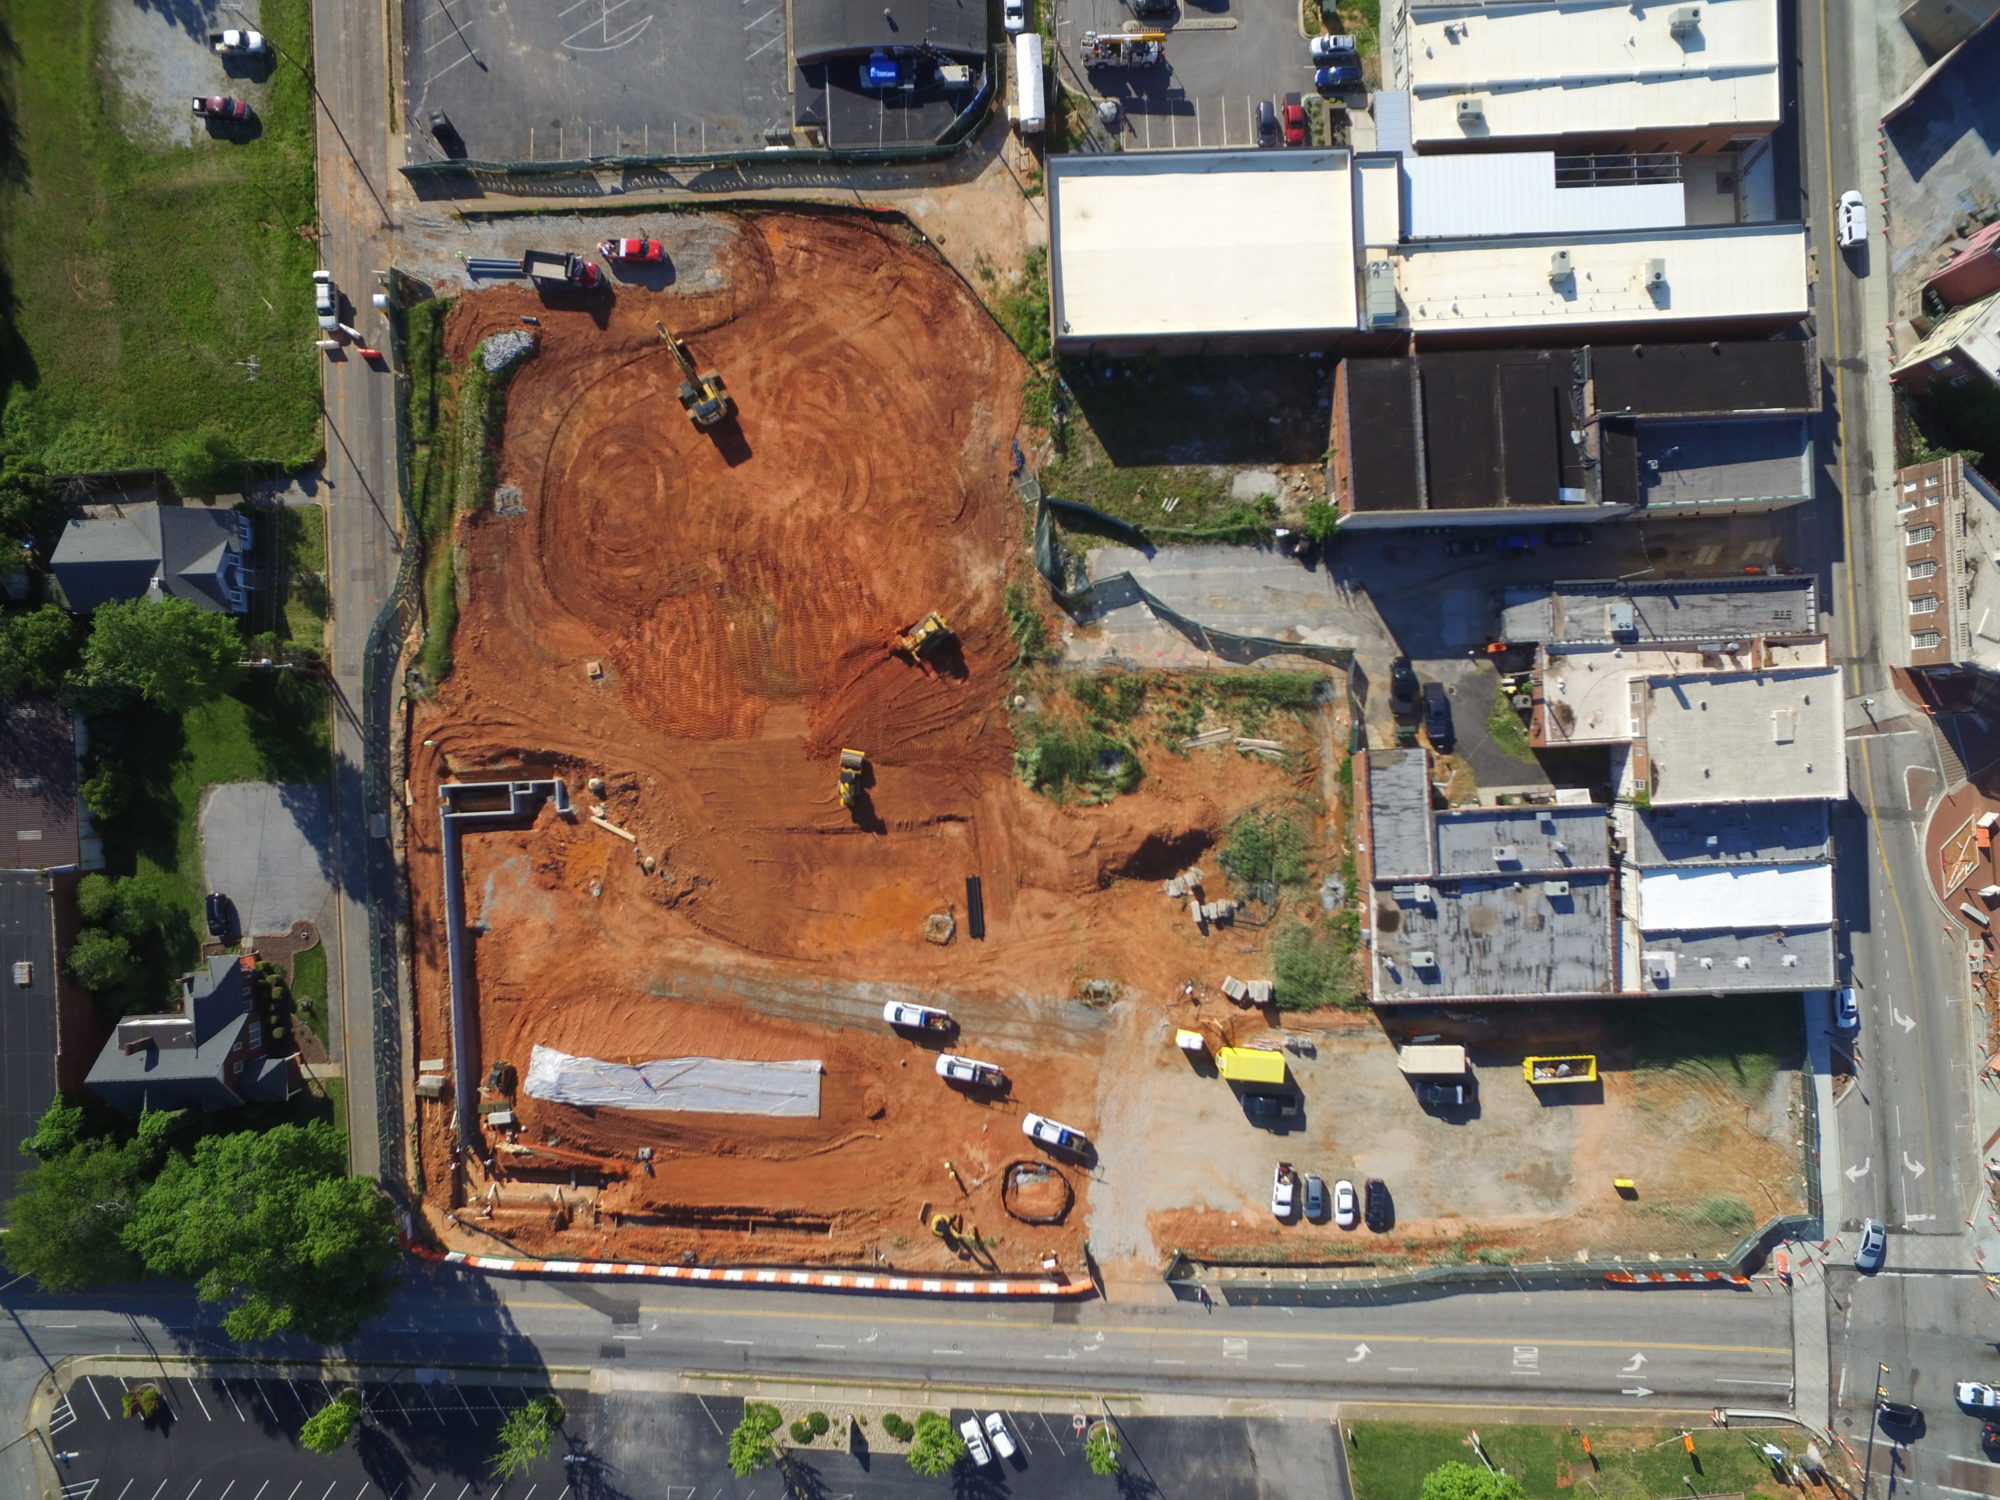 Triangle mobilizes for a new parking deck in Greer